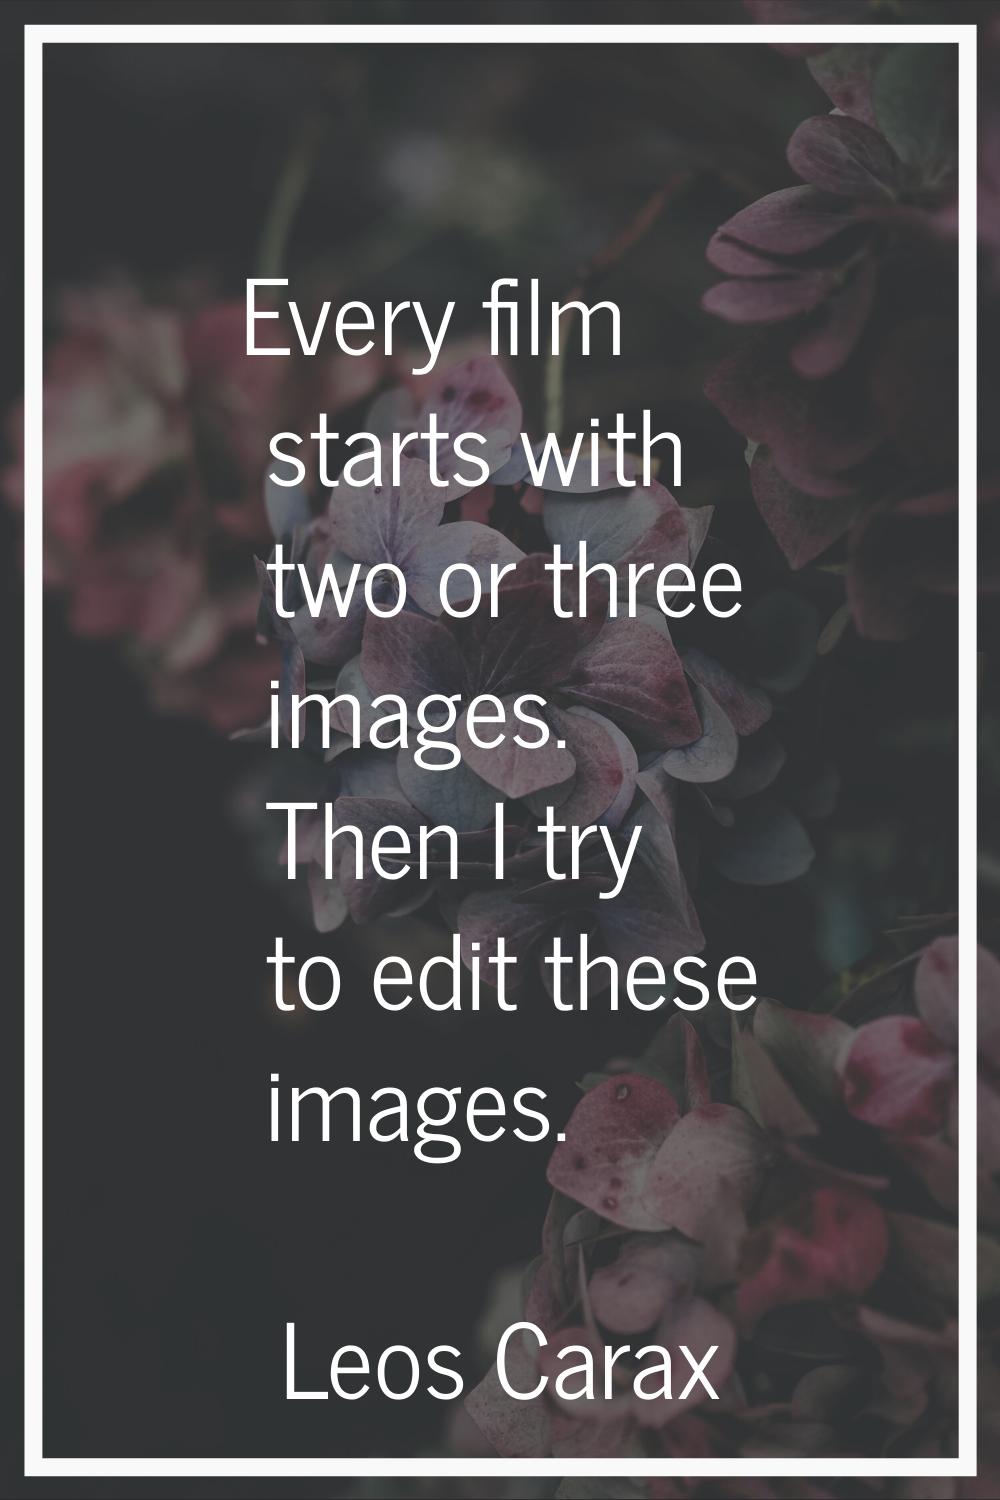 Every film starts with two or three images. Then I try to edit these images.